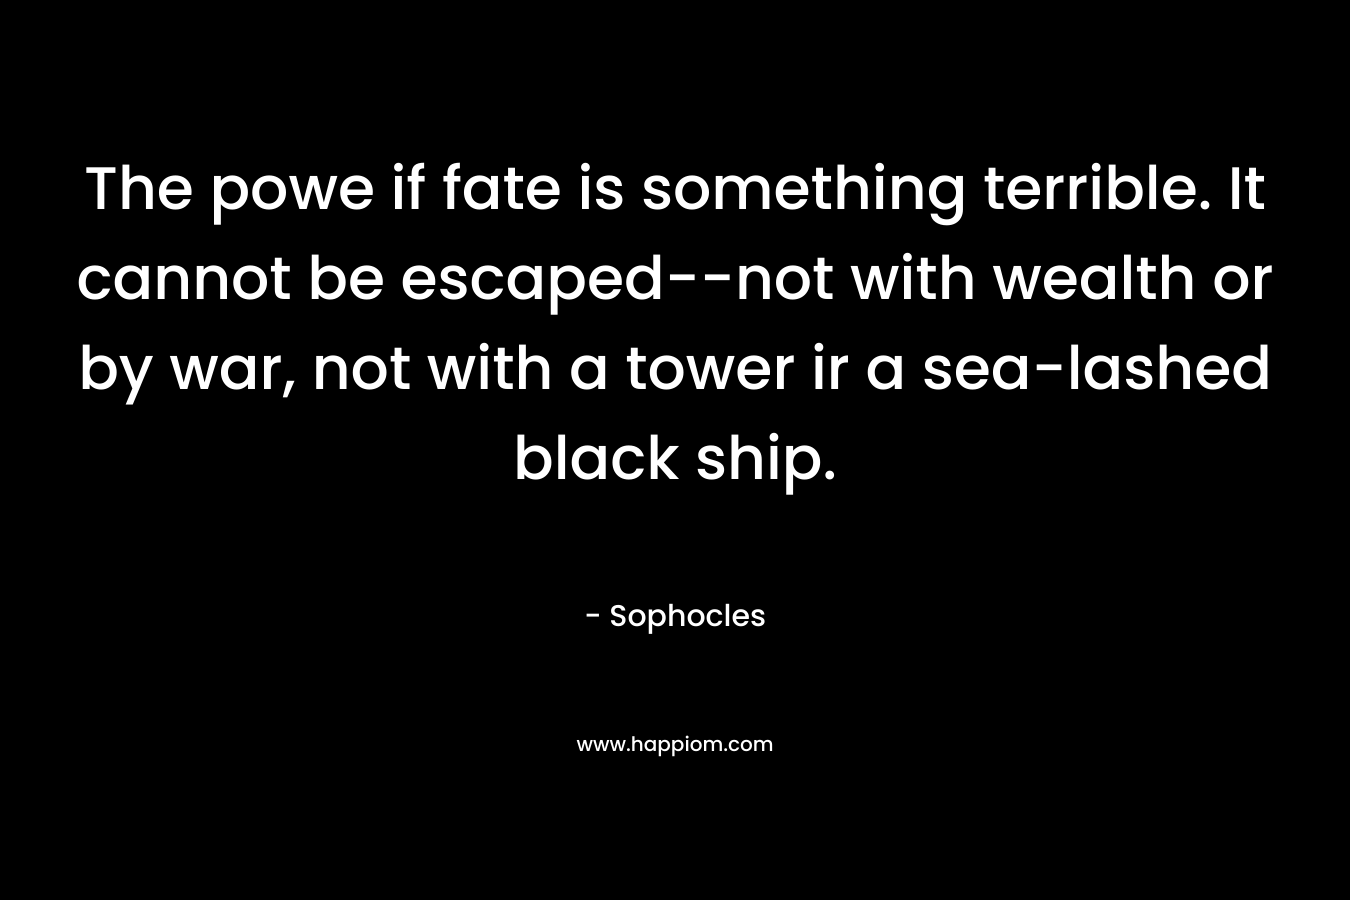 The powe if fate is something terrible. It cannot be escaped--not with wealth or by war, not with a tower ir a sea-lashed black ship.